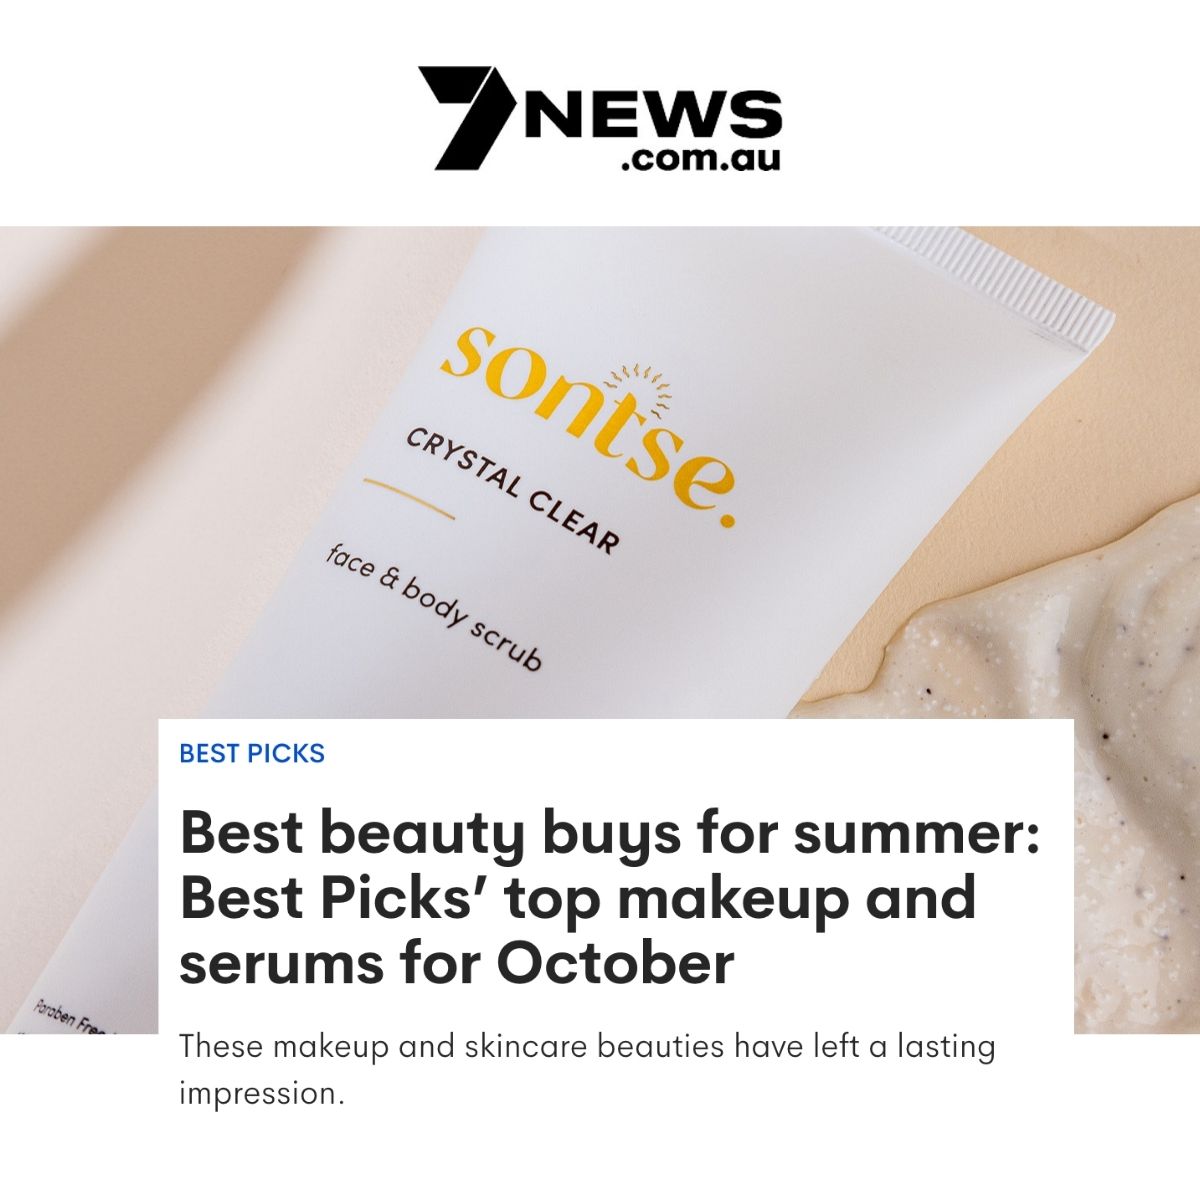 Best beauty buys for summer: Best Picks’ top makeup and serums for October